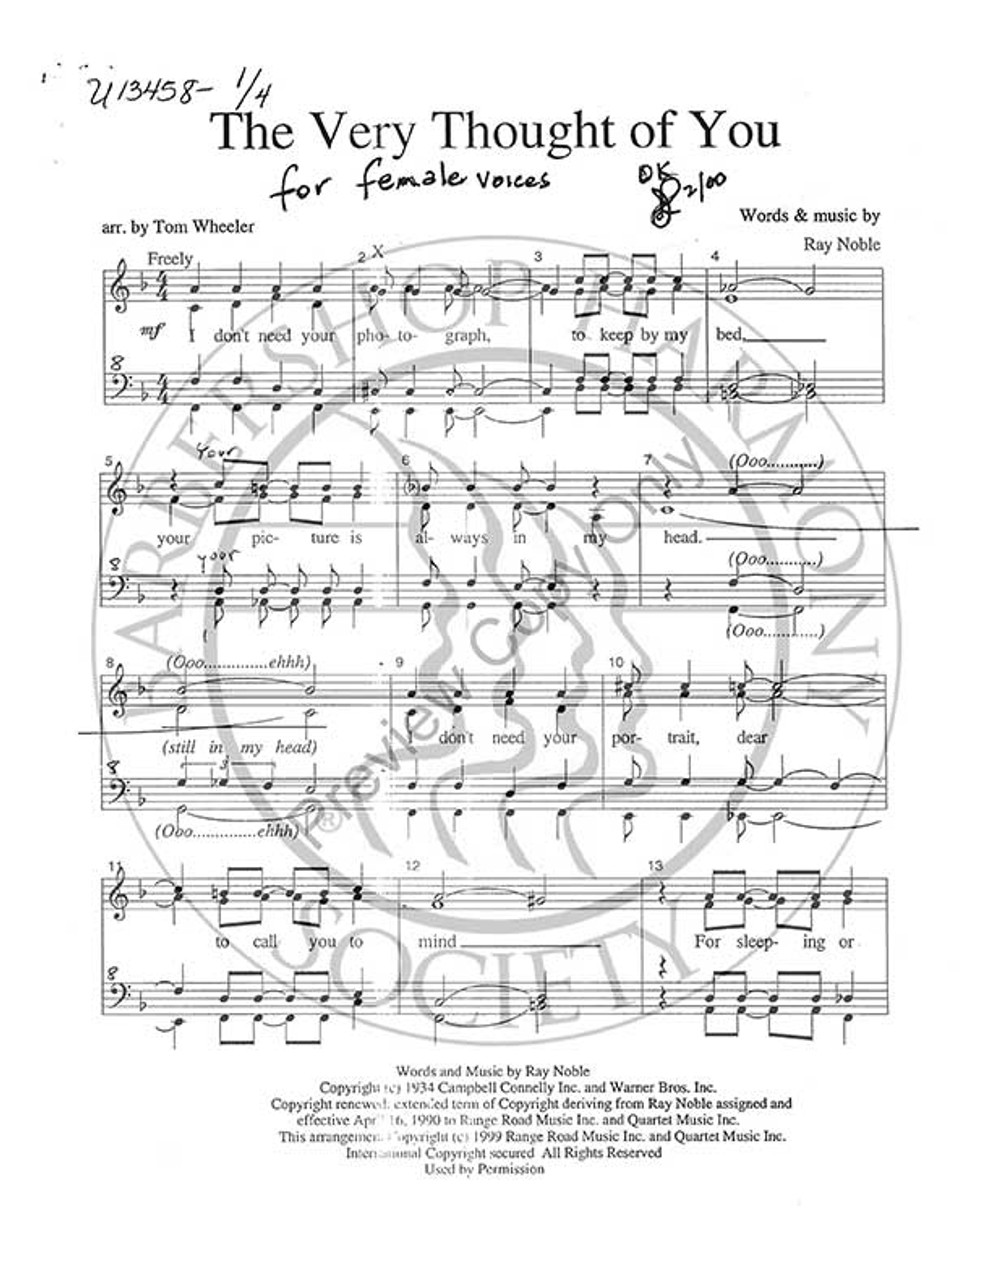 Very Thought Of You, The (SSAA) (arr. Tom Wheeler)-UNPUB